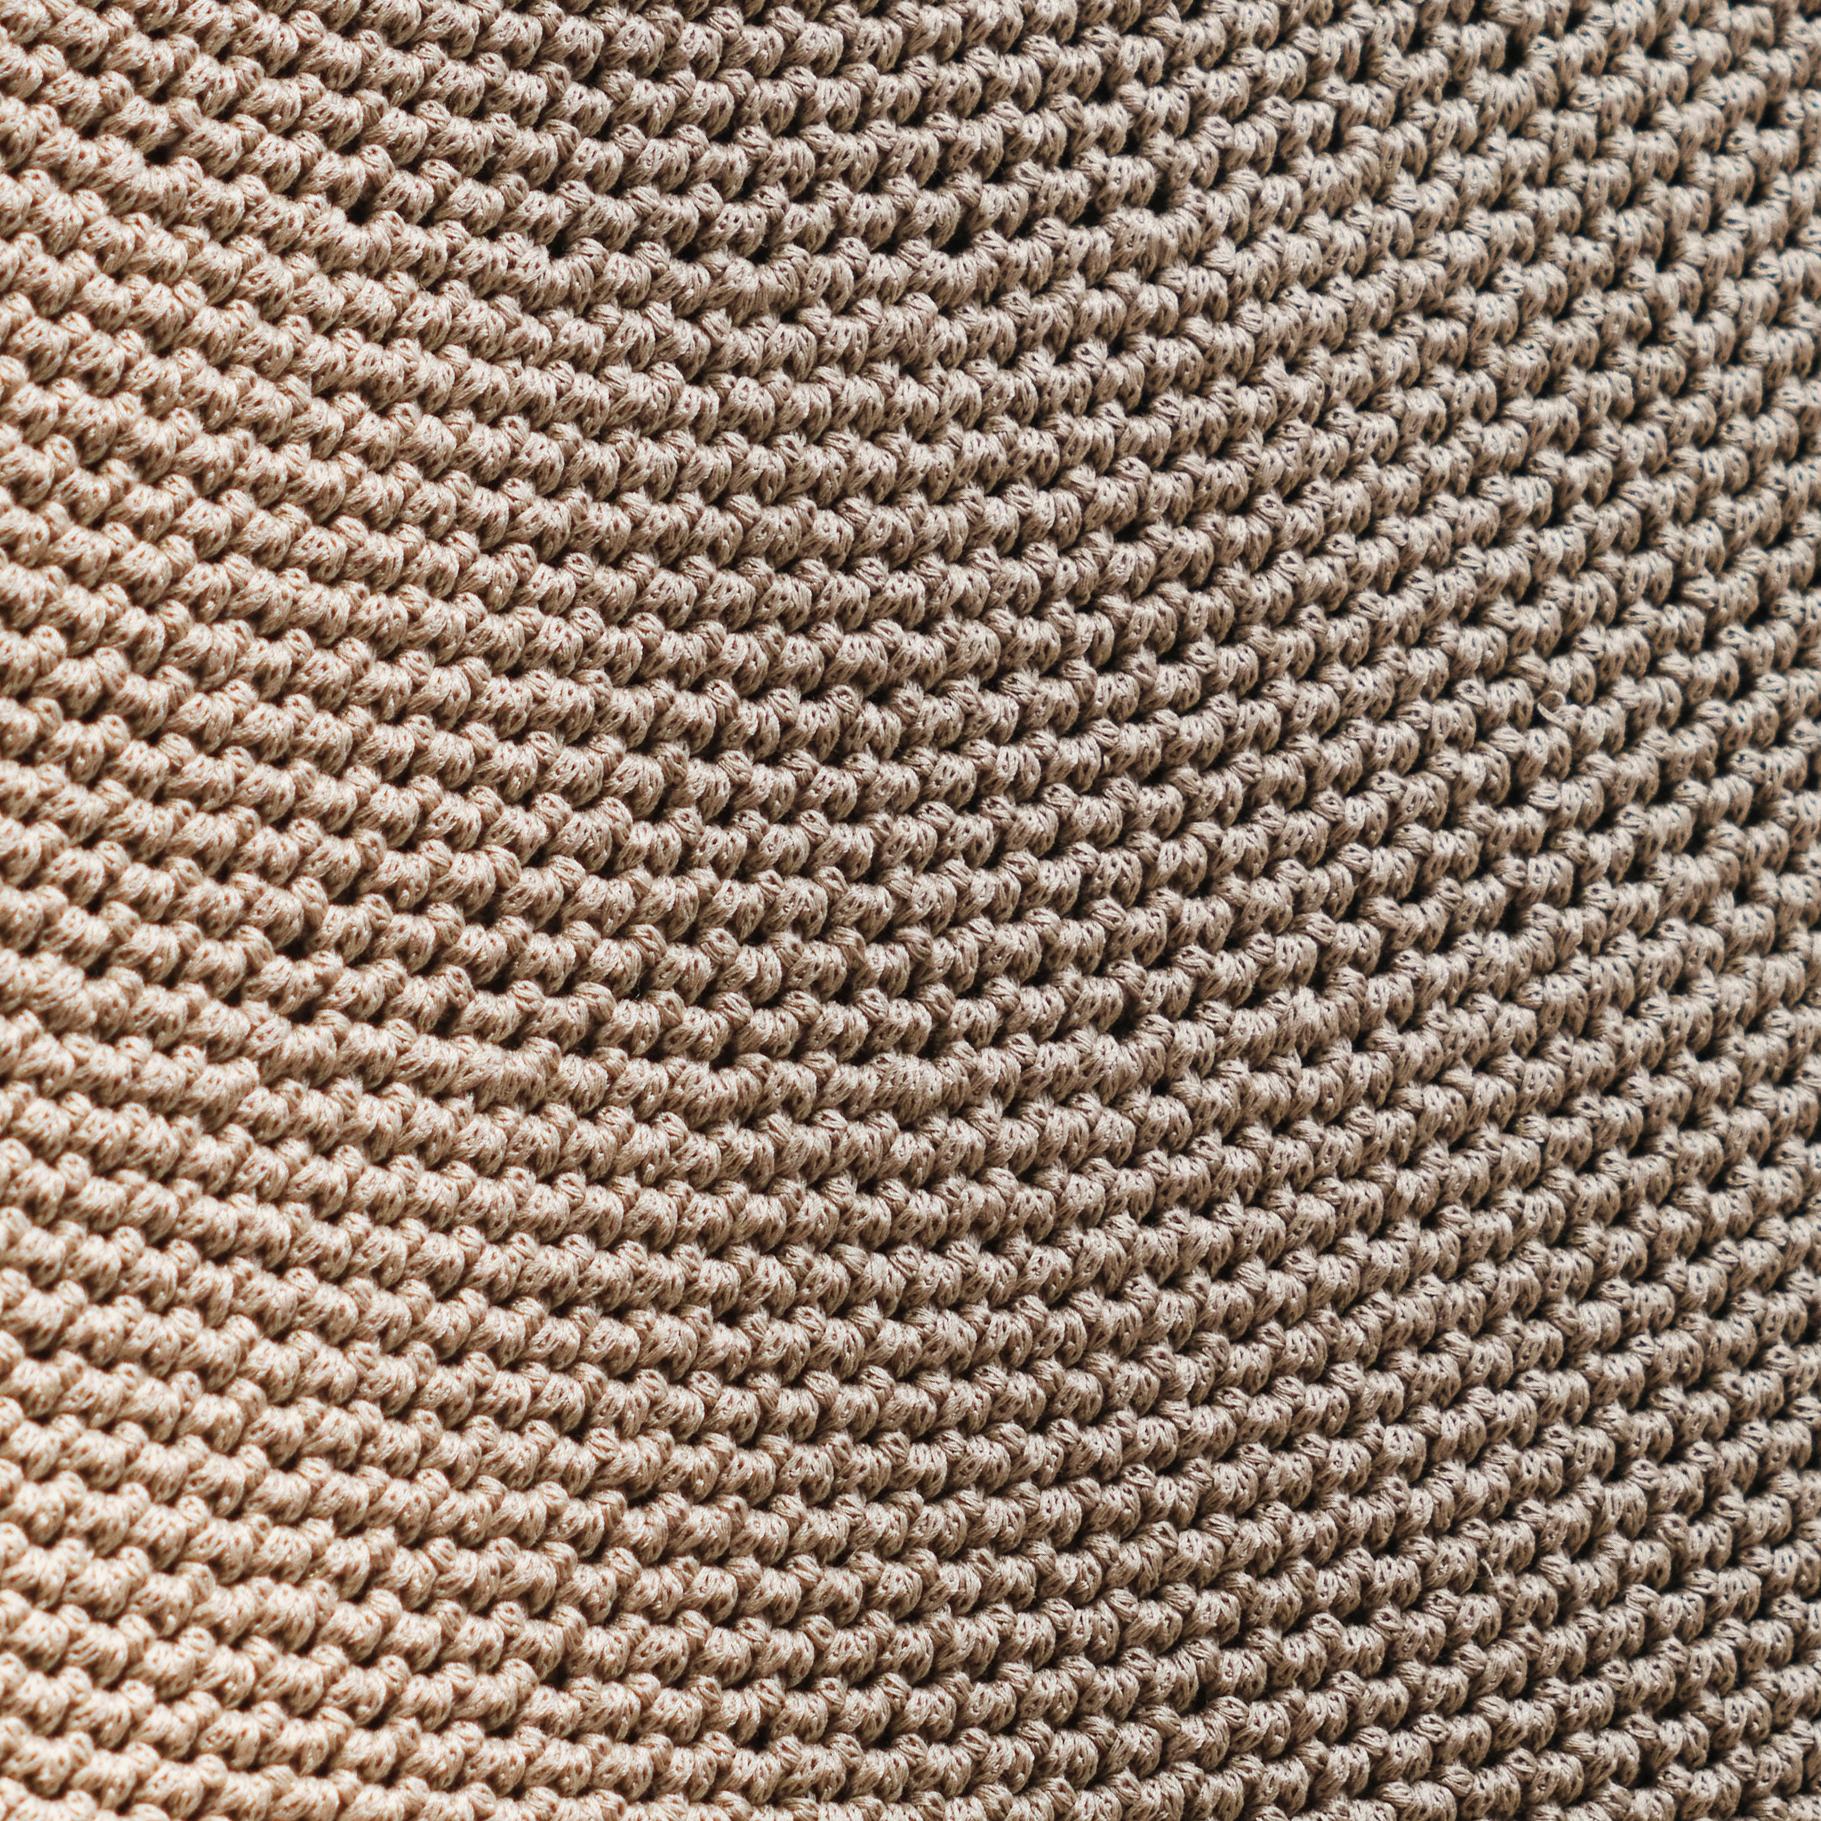 British SS03 Pendant Light Ø60cm/23.6in, Hand Crocheted in 100% Egyptian Cotton For Sale